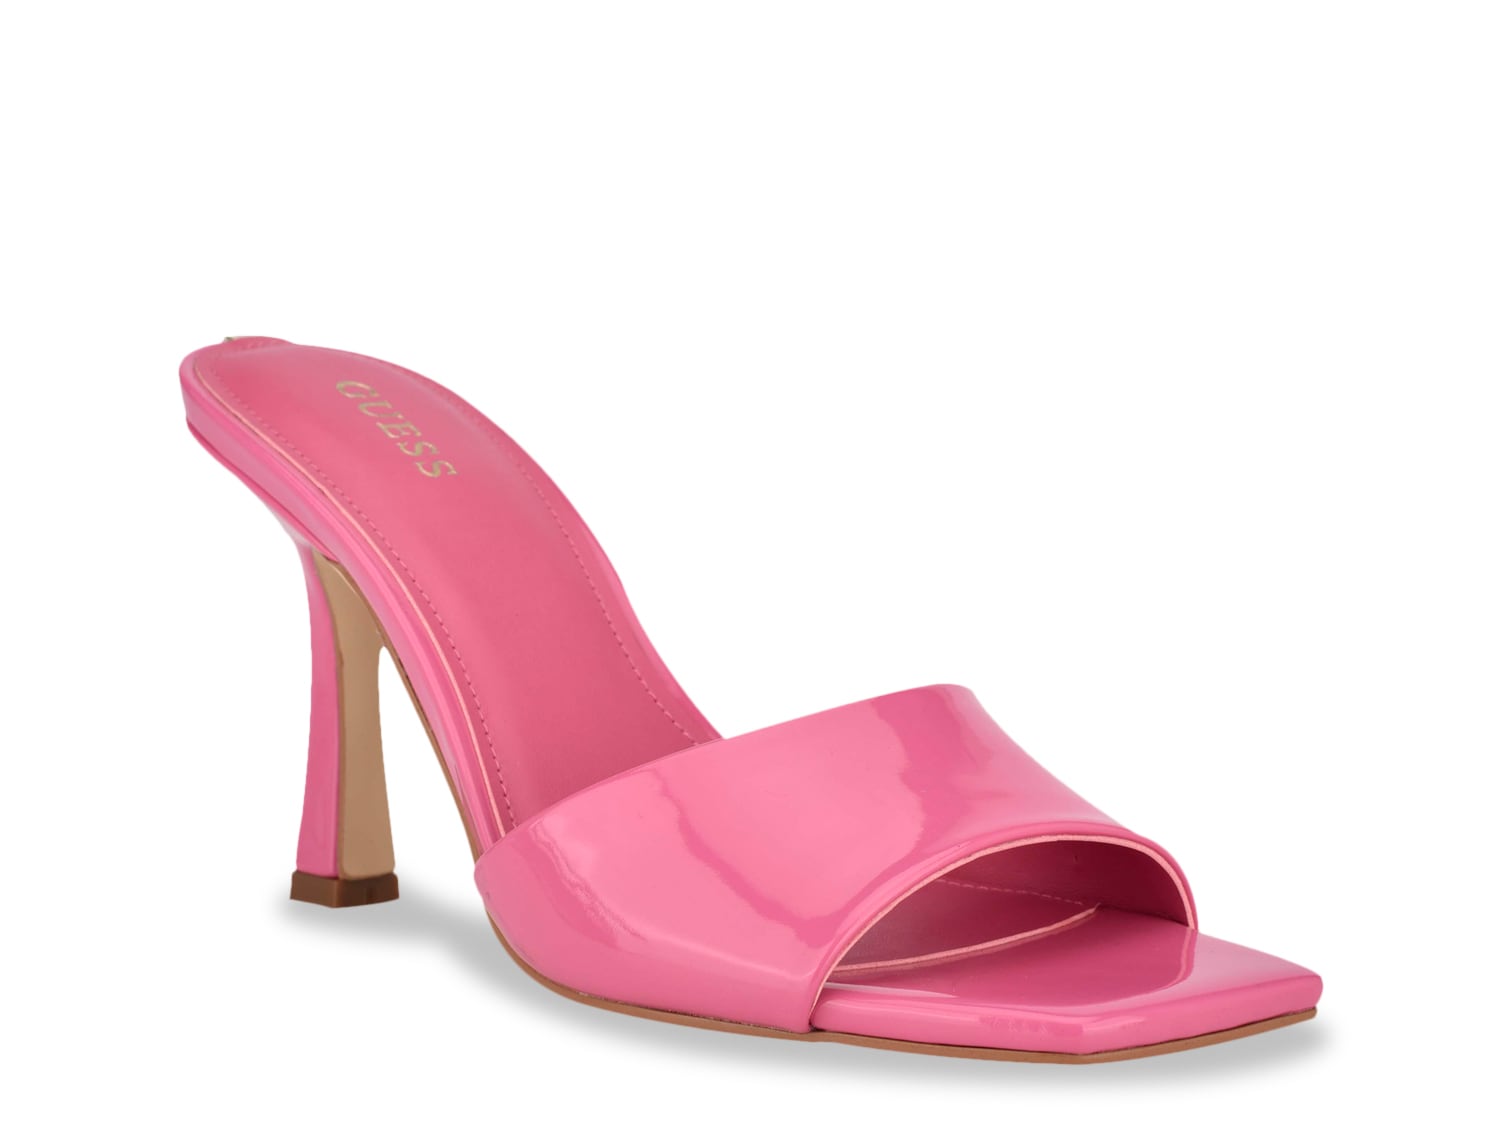 Guess Seldie Slide Sandal - Free Shipping | DSW